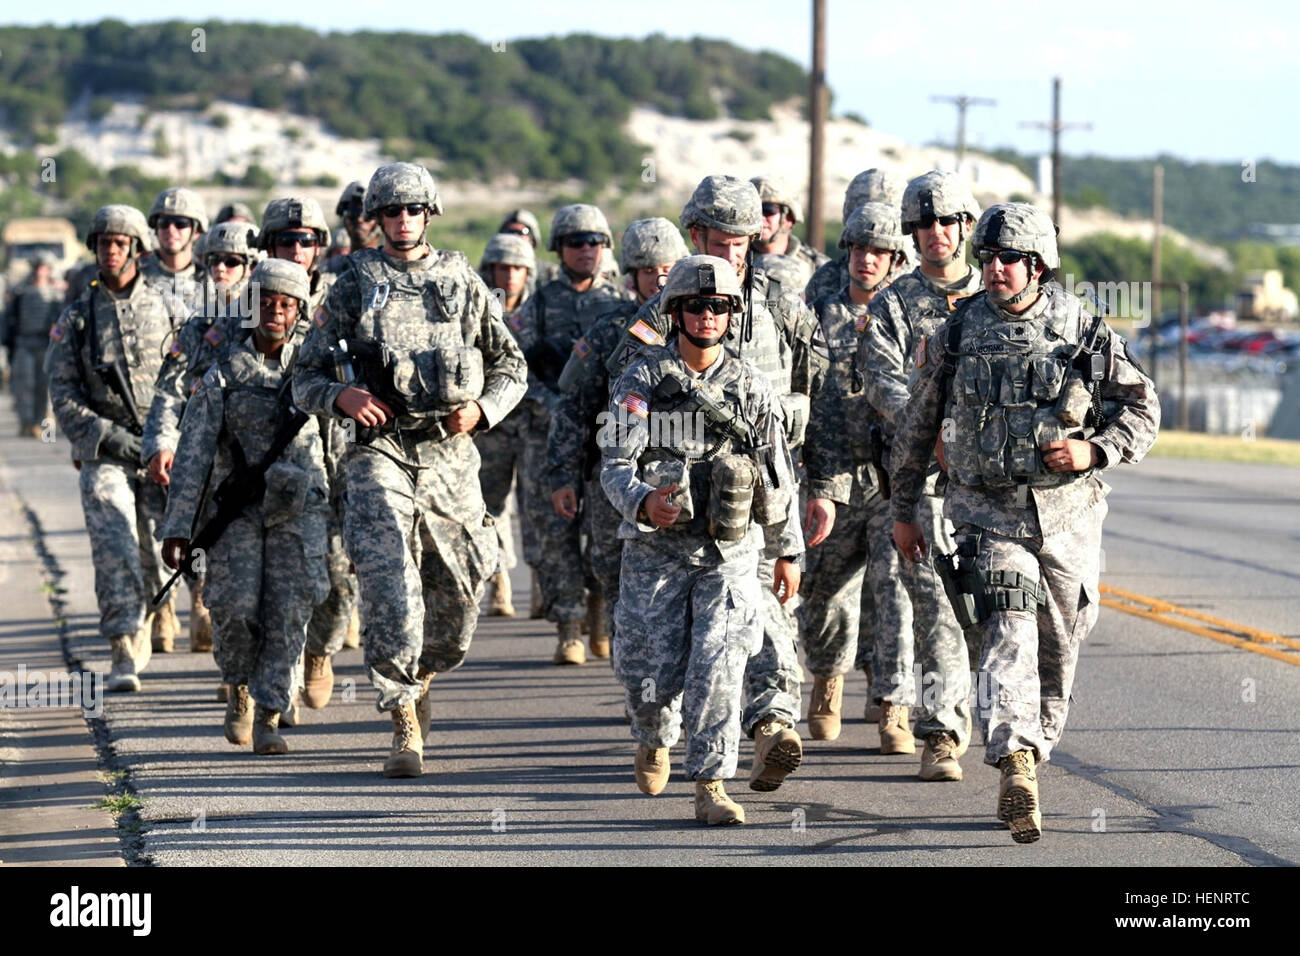 Lt. Col. Anthony Asborno (right), commander for the 3rd Assault Helicopter Battalion, 227th Aviation Regiment, 1st Air Cavalry Brigade, 1st Cavalry Division, leads his Soldiers during the brigade’s 9/11 commemoration foot march at Fort Hood, Texas, Sept. 11. The six-mile march was held to honor those who lost their lives that fateful day 13 years ago and to pay tribute to those brave troopers who have sacrificed since for our nation’s freedom. 1st Air Cav executes 9-11 commemoration foot march 140911-A-WD324-049 Stock Photo